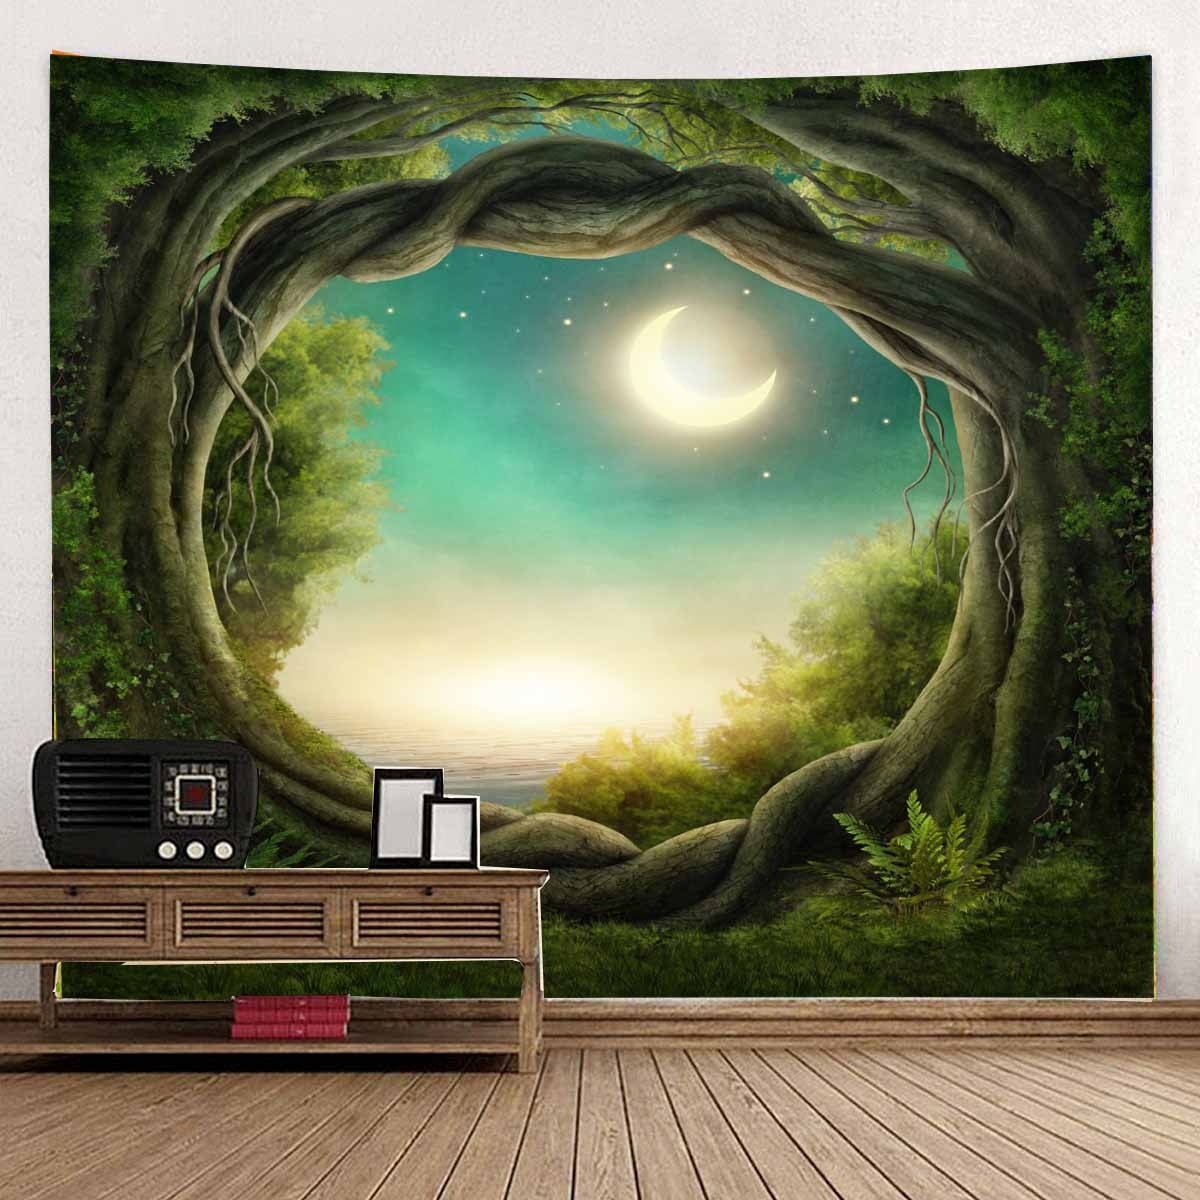 Fantasy-Forest-Tapestry-Wall-Hanging-Landscape-Wall-Tapestry-Home-Decoration-Hanging-Painting-1899638-3